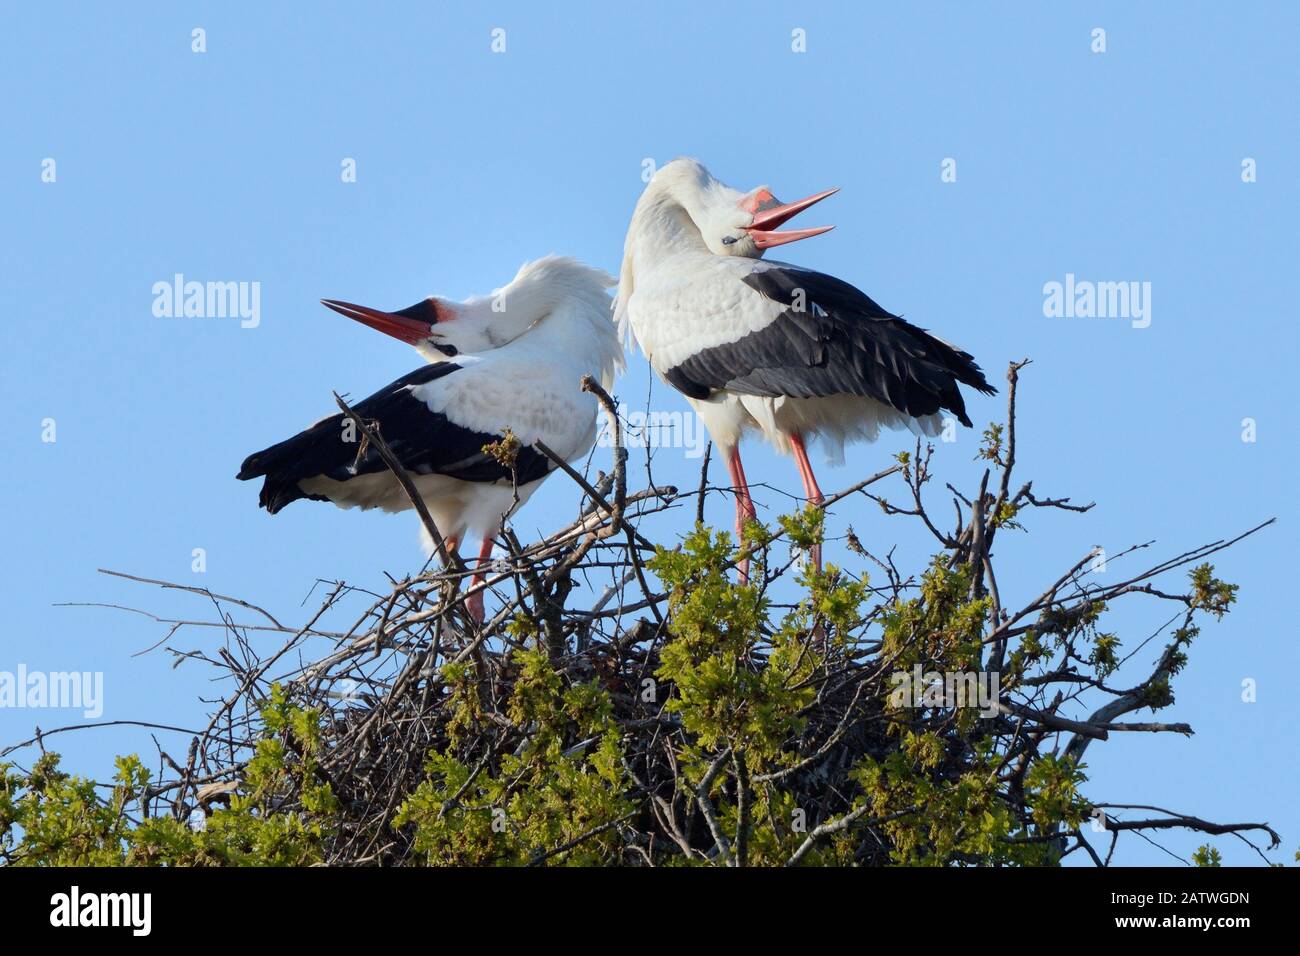 White stork (Ciconia ciconia) pair performing an up-down display with bill clattering on their nest in an Oak tree, Knepp estate, Sussex, UK, April 2019. This is the first recorded instance of White storks nesting in the UK for several hundreds of years. Stock Photo